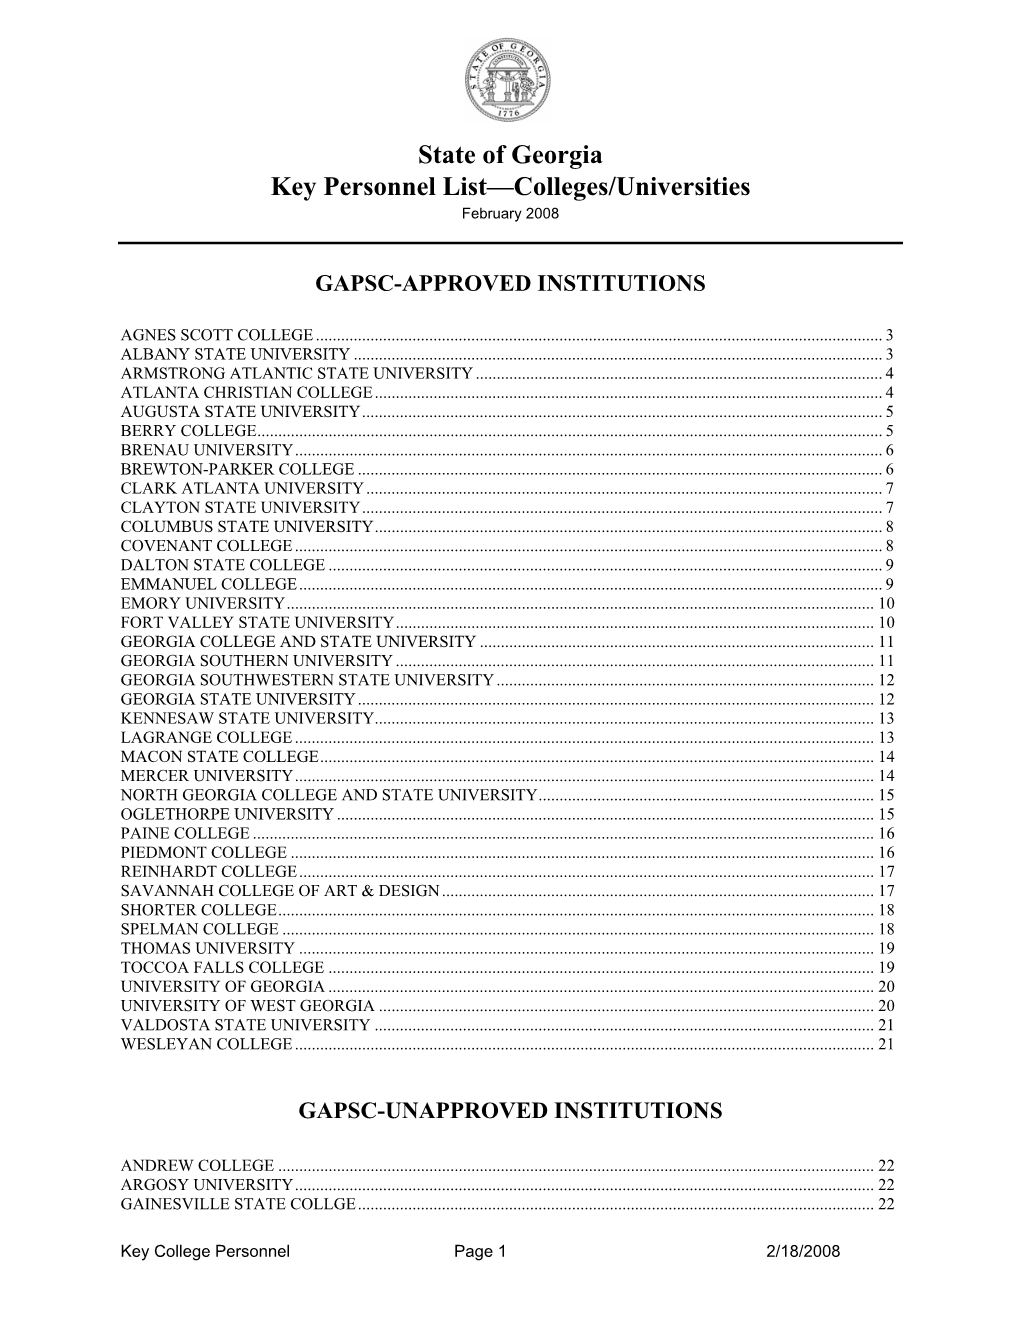 State of Georgia Key Personnel List—Colleges/Universities February 2008